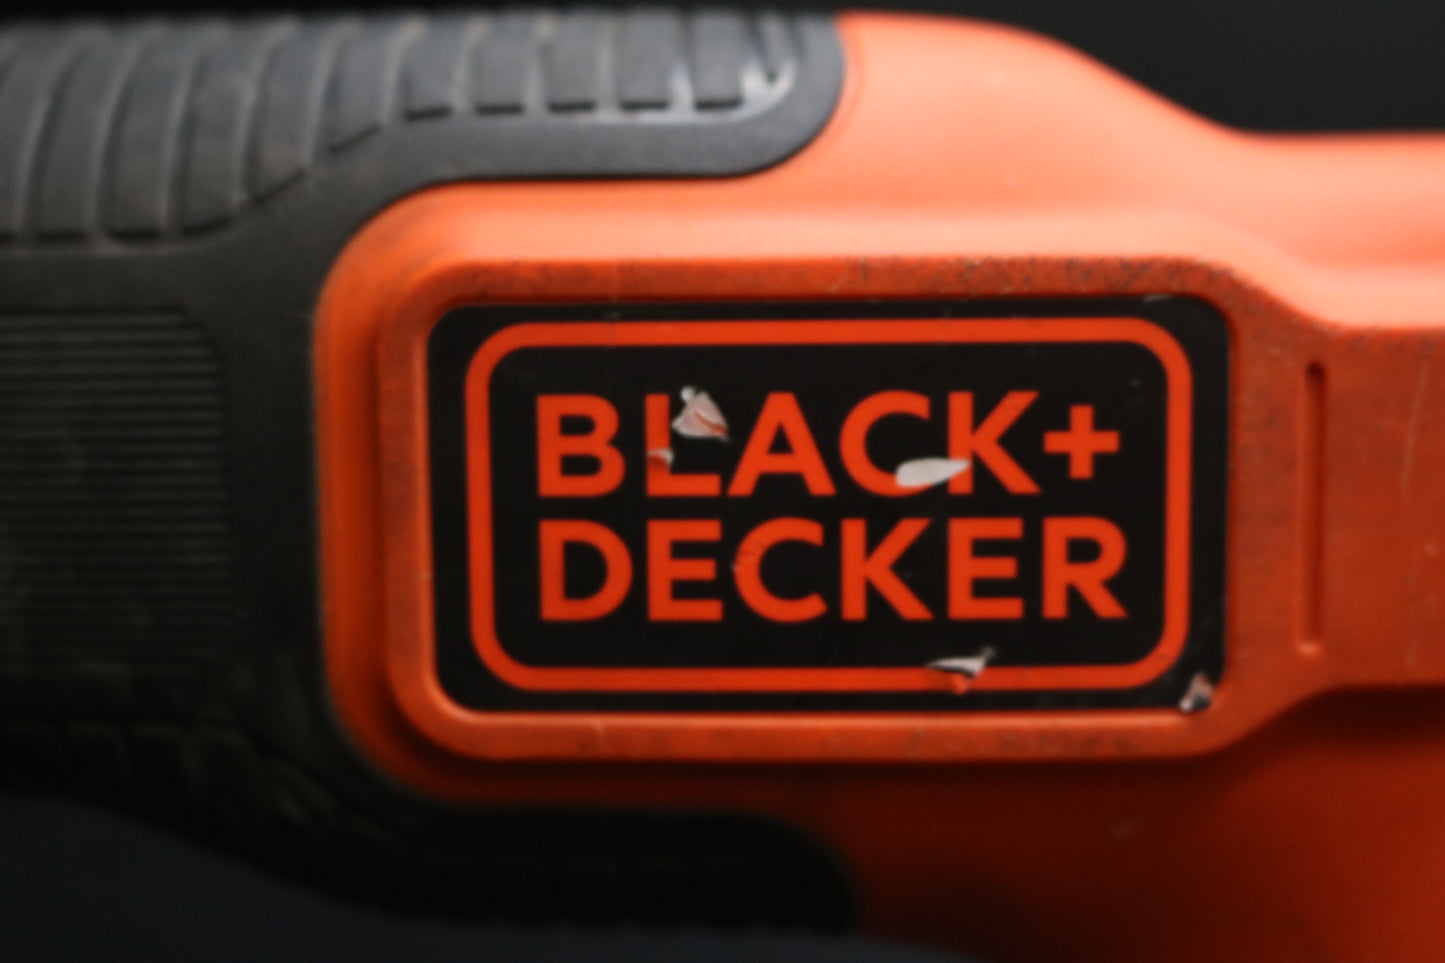 Black+Decker 20V Max Cordless Reciprocating Saw (Local pick-up only)